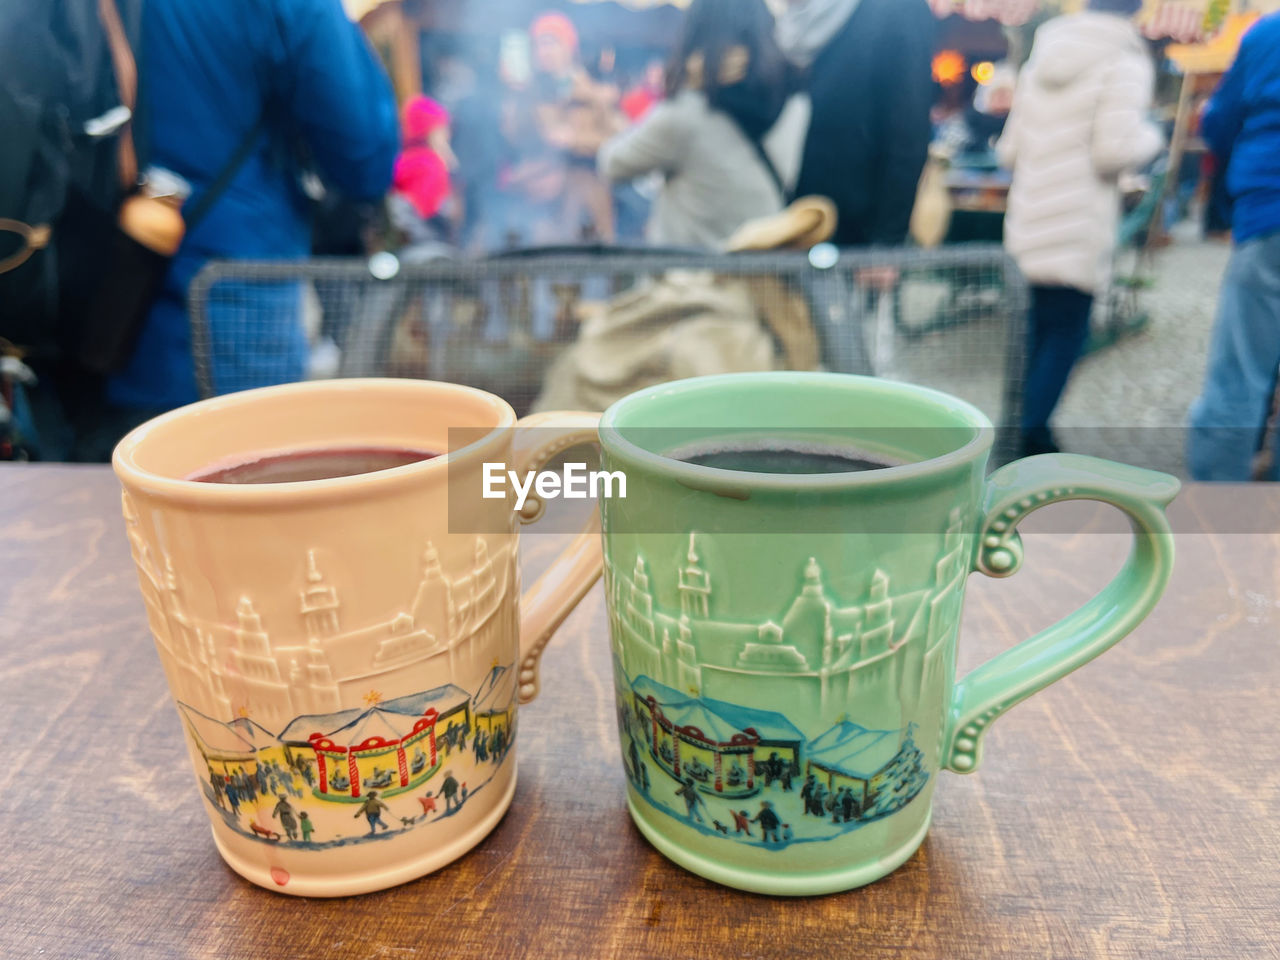 cup, food and drink, drink, mug, coffee cup, hot drink, focus on foreground, refreshment, tea, group of people, adult, table, tableware, tea cup, day, business, coffee, ceramic, food, outdoors, cafe, men